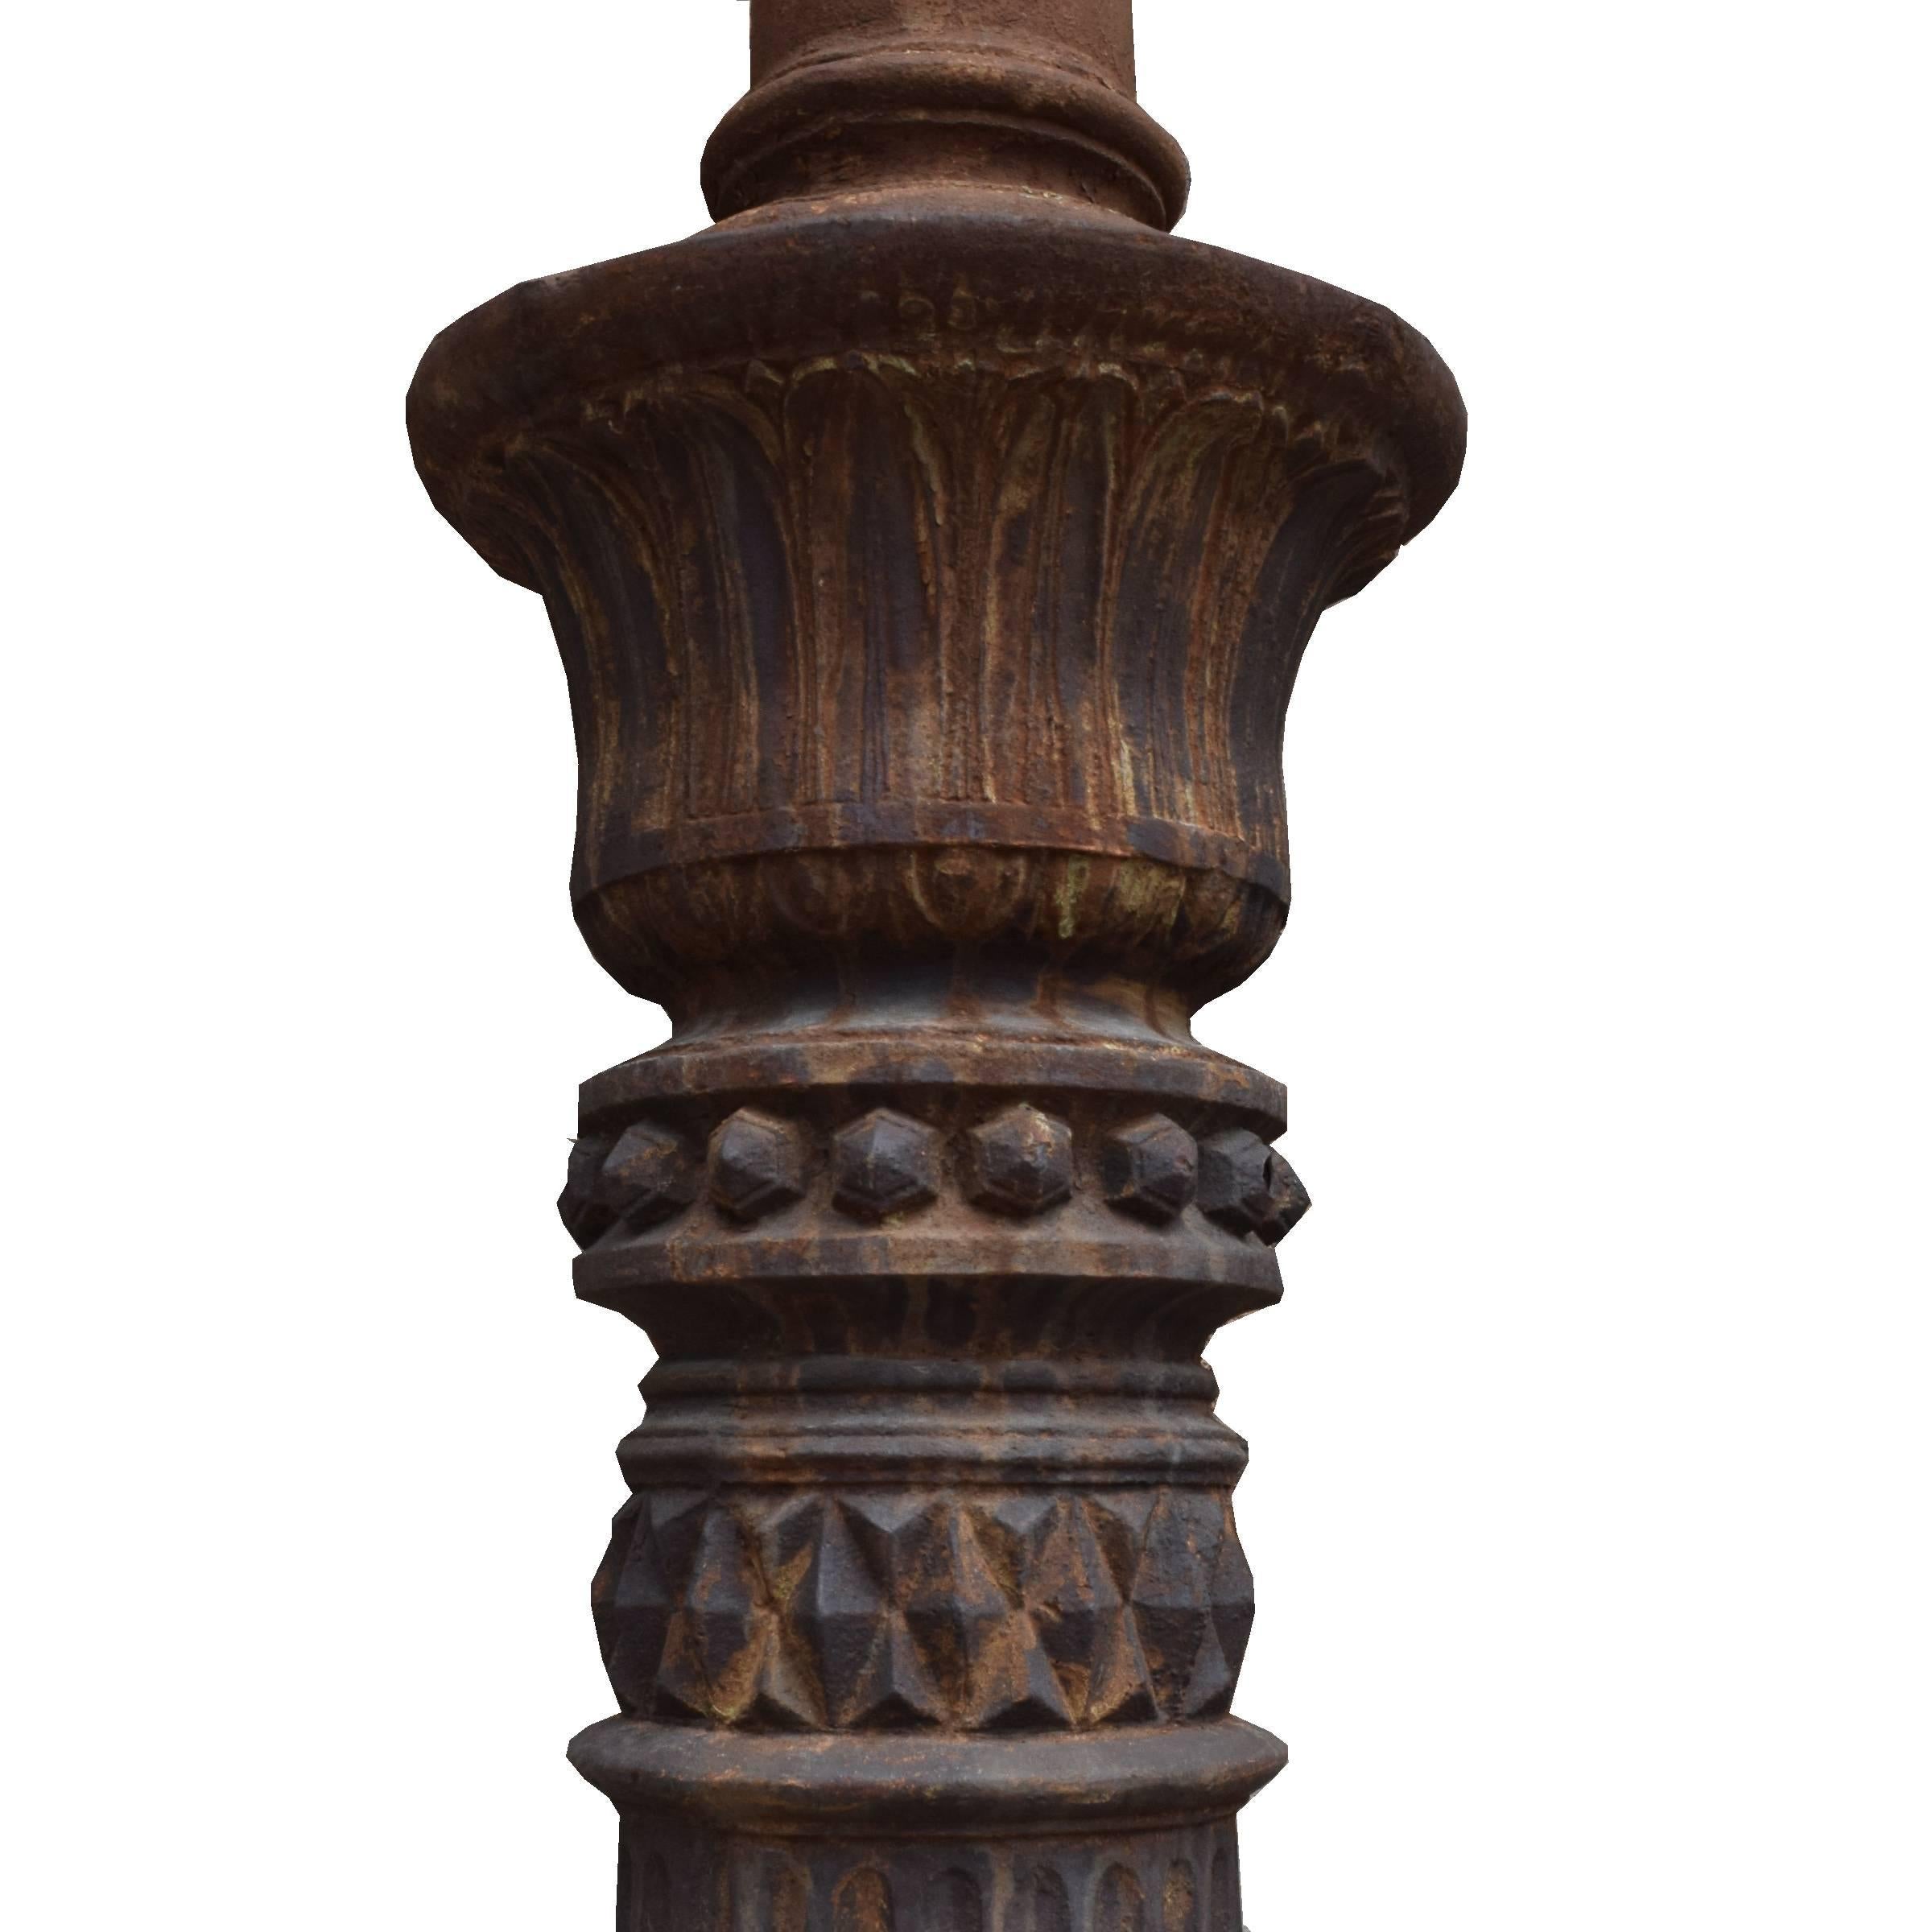 American Original Lamp Post from the World's Columbian Exposition, 1893